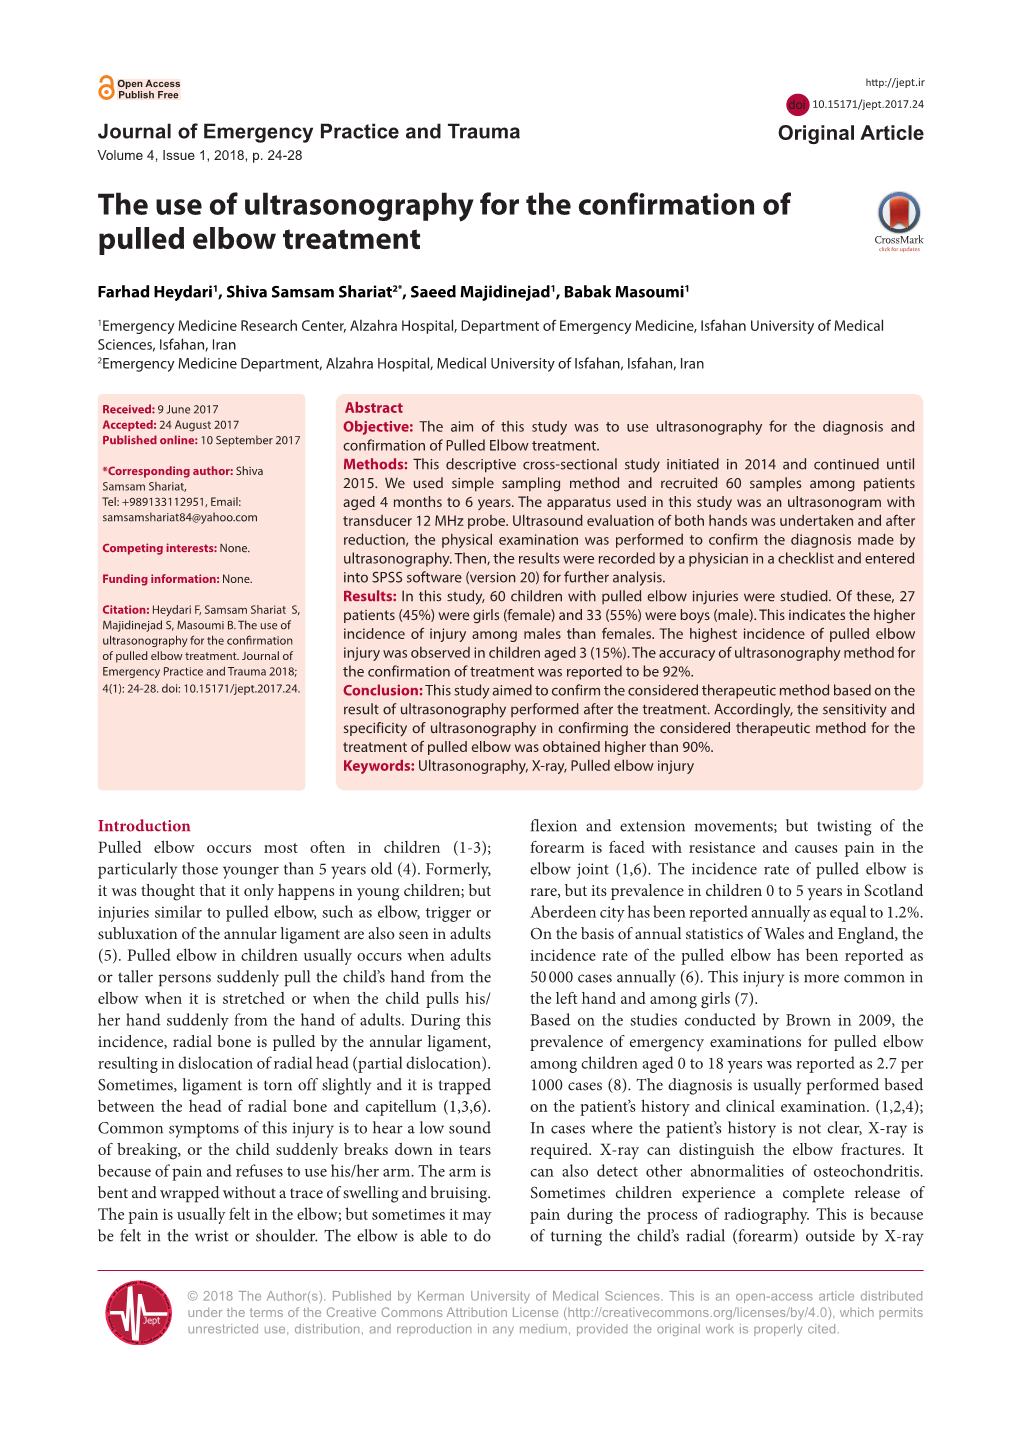 The Use of Ultrasonography for the Confirmation of Pulled Elbow Treatment